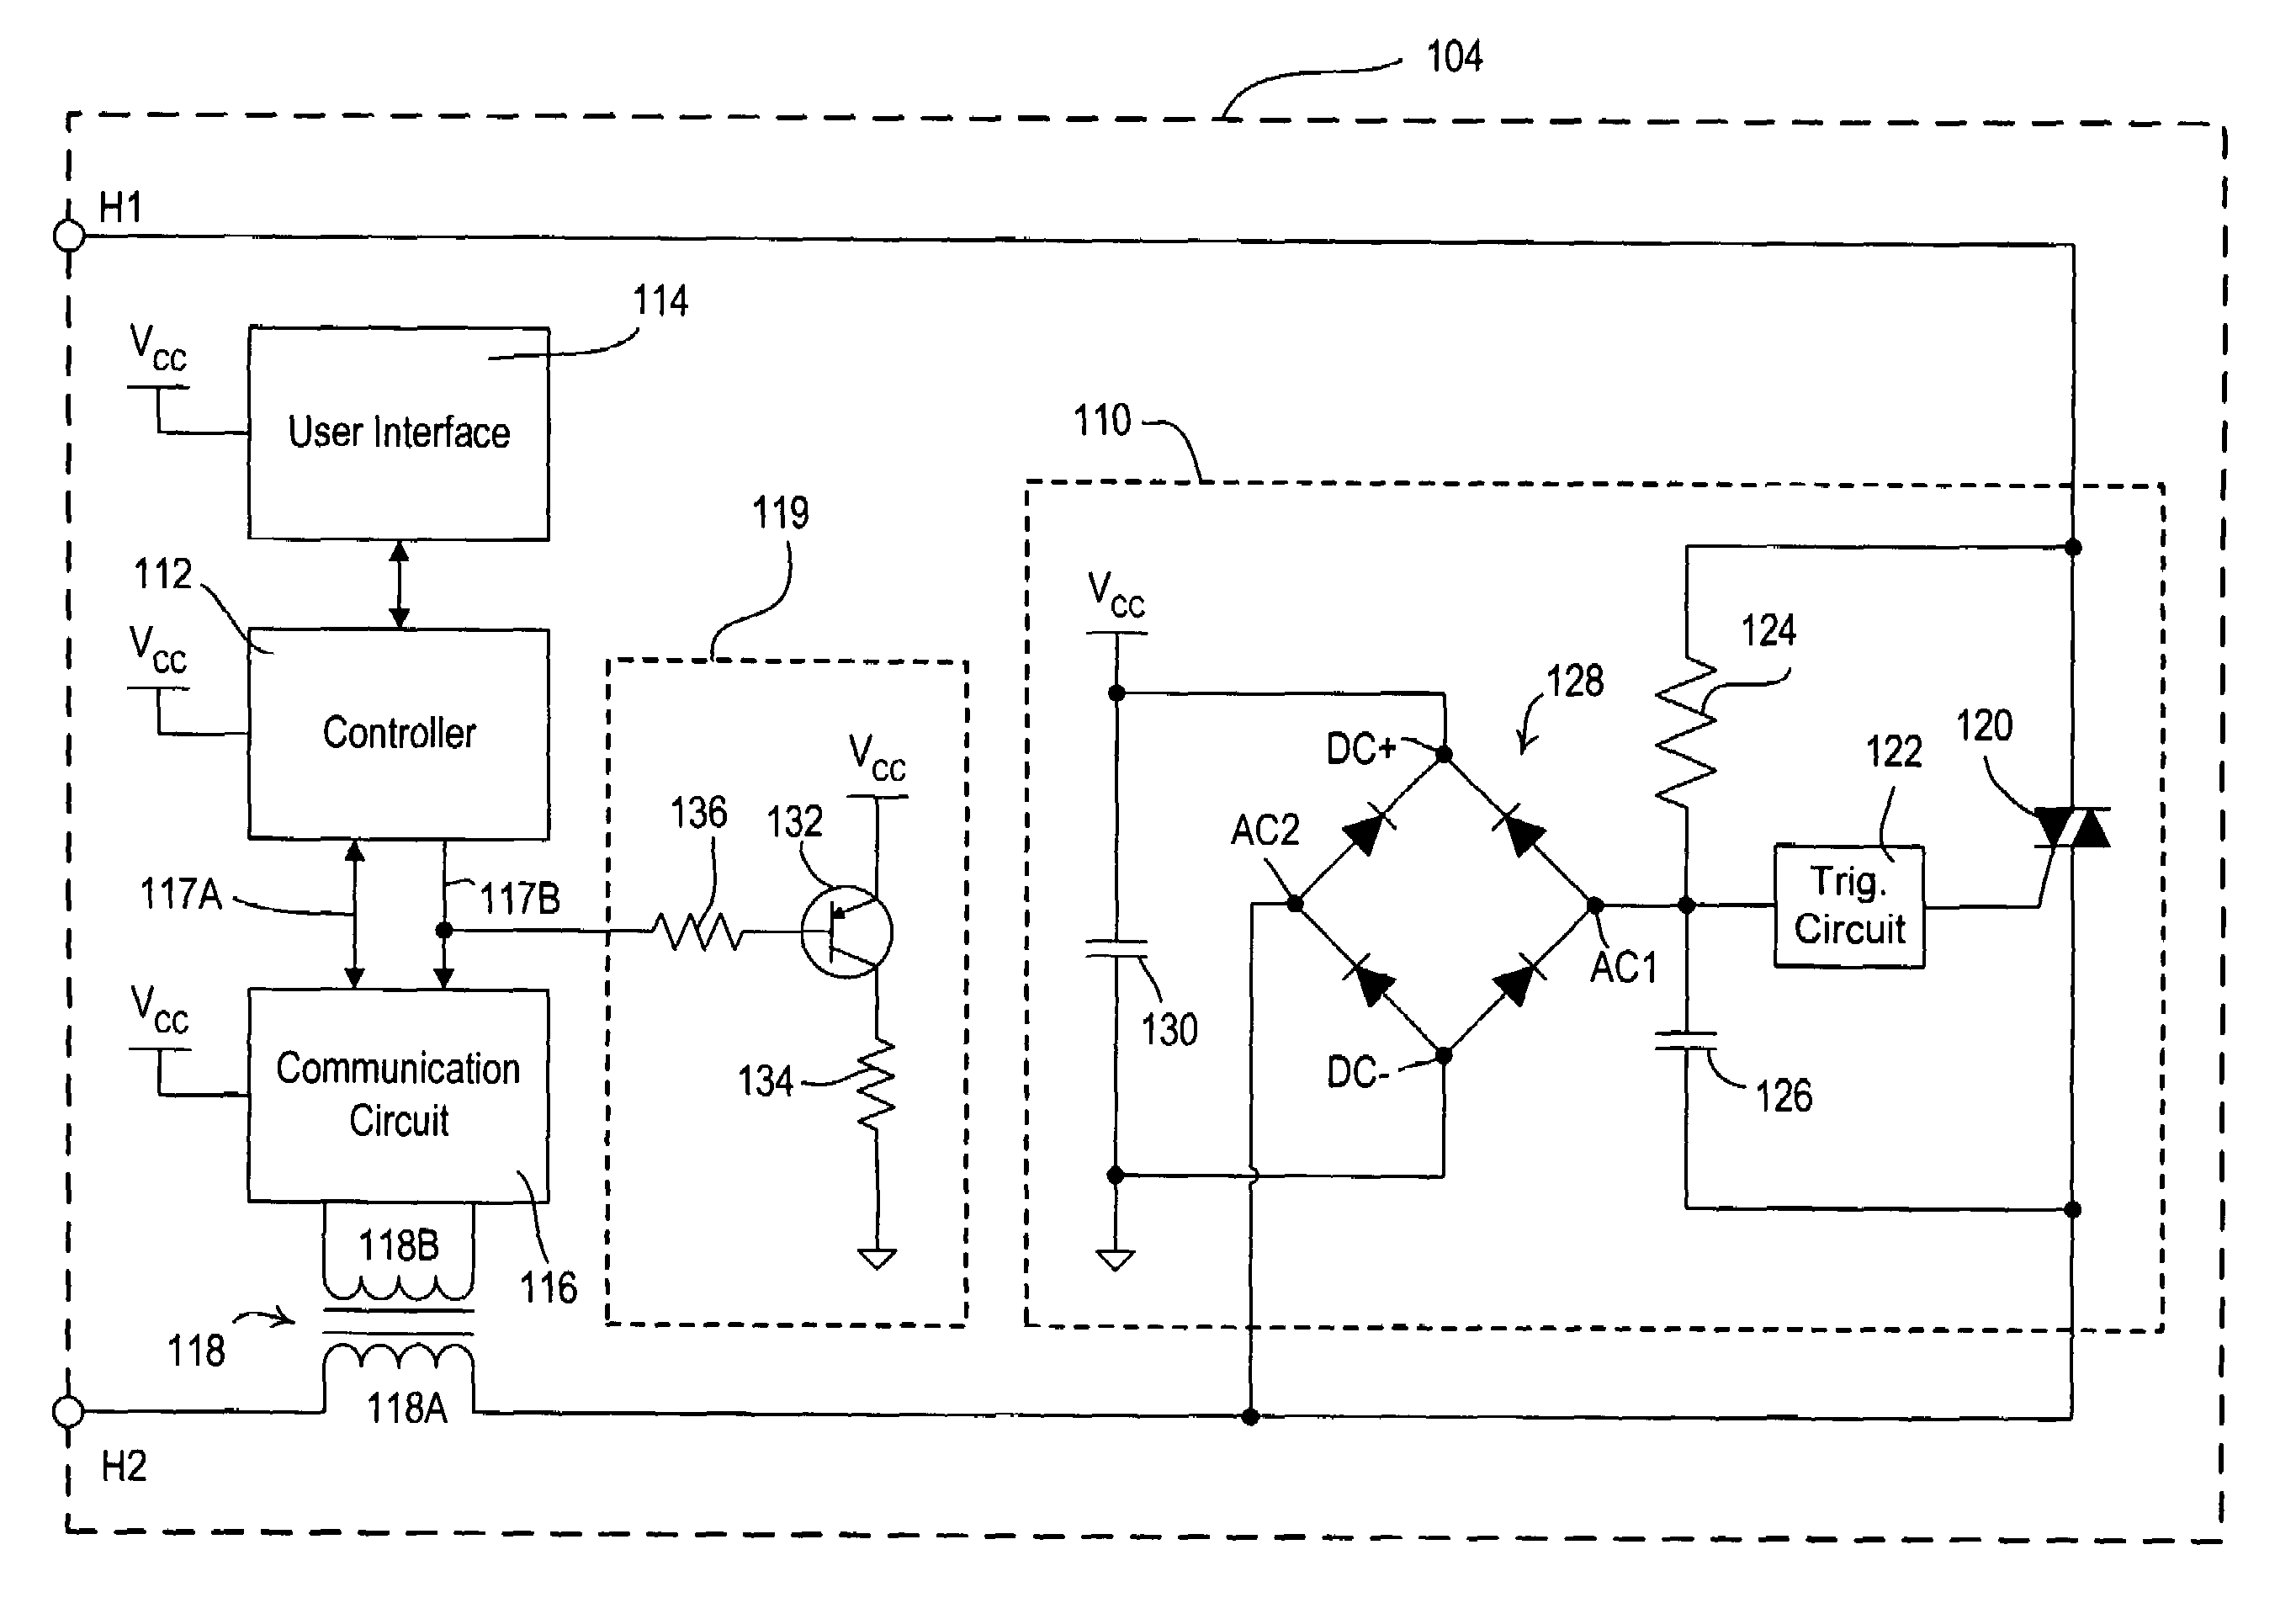 Power supply for a load control device